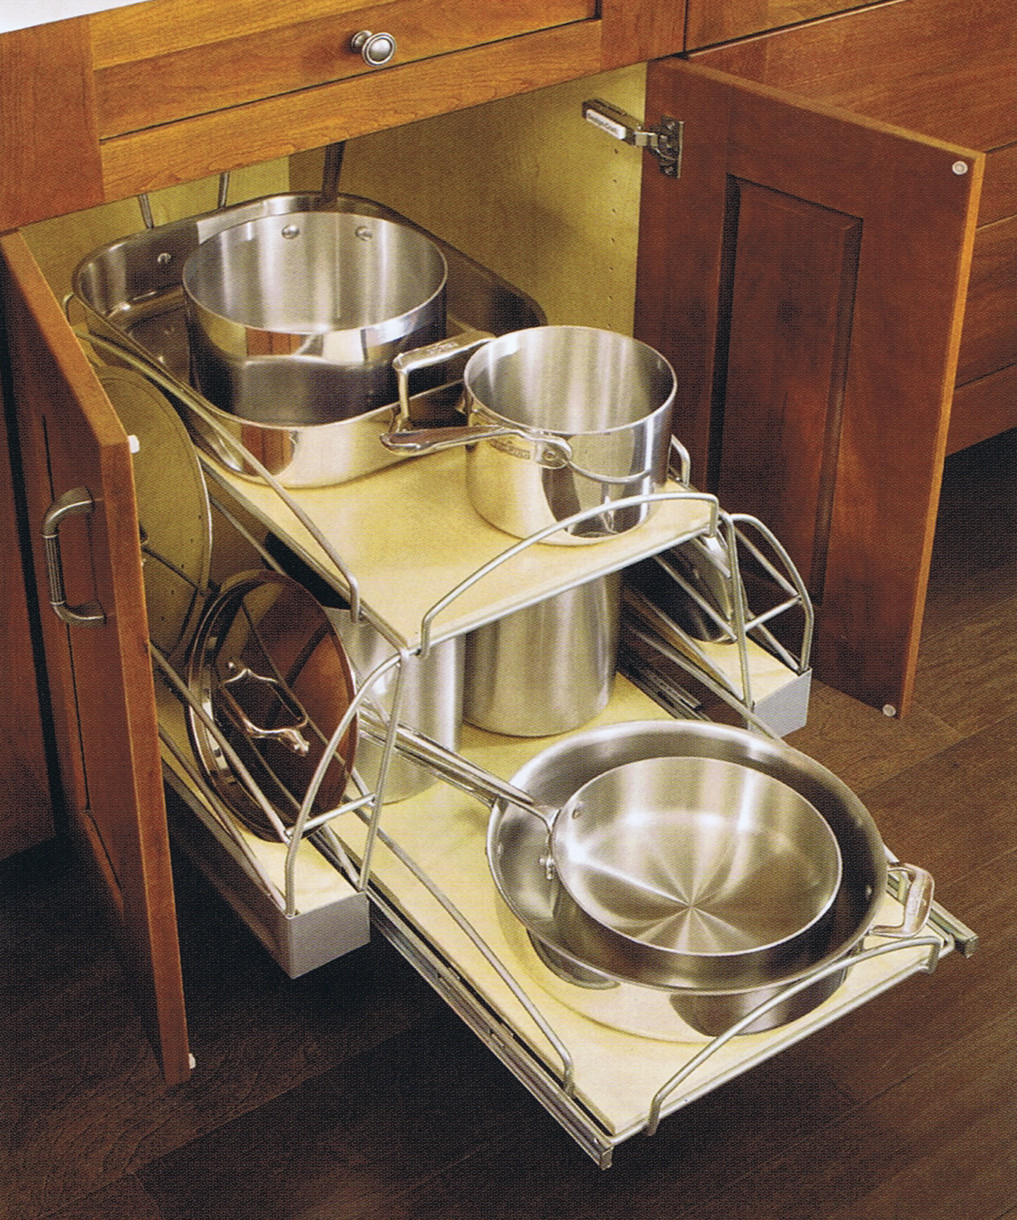 Kitchen Pots And Pan Organizer
 Stylish Ways to Store Pots and Pans In An Organized